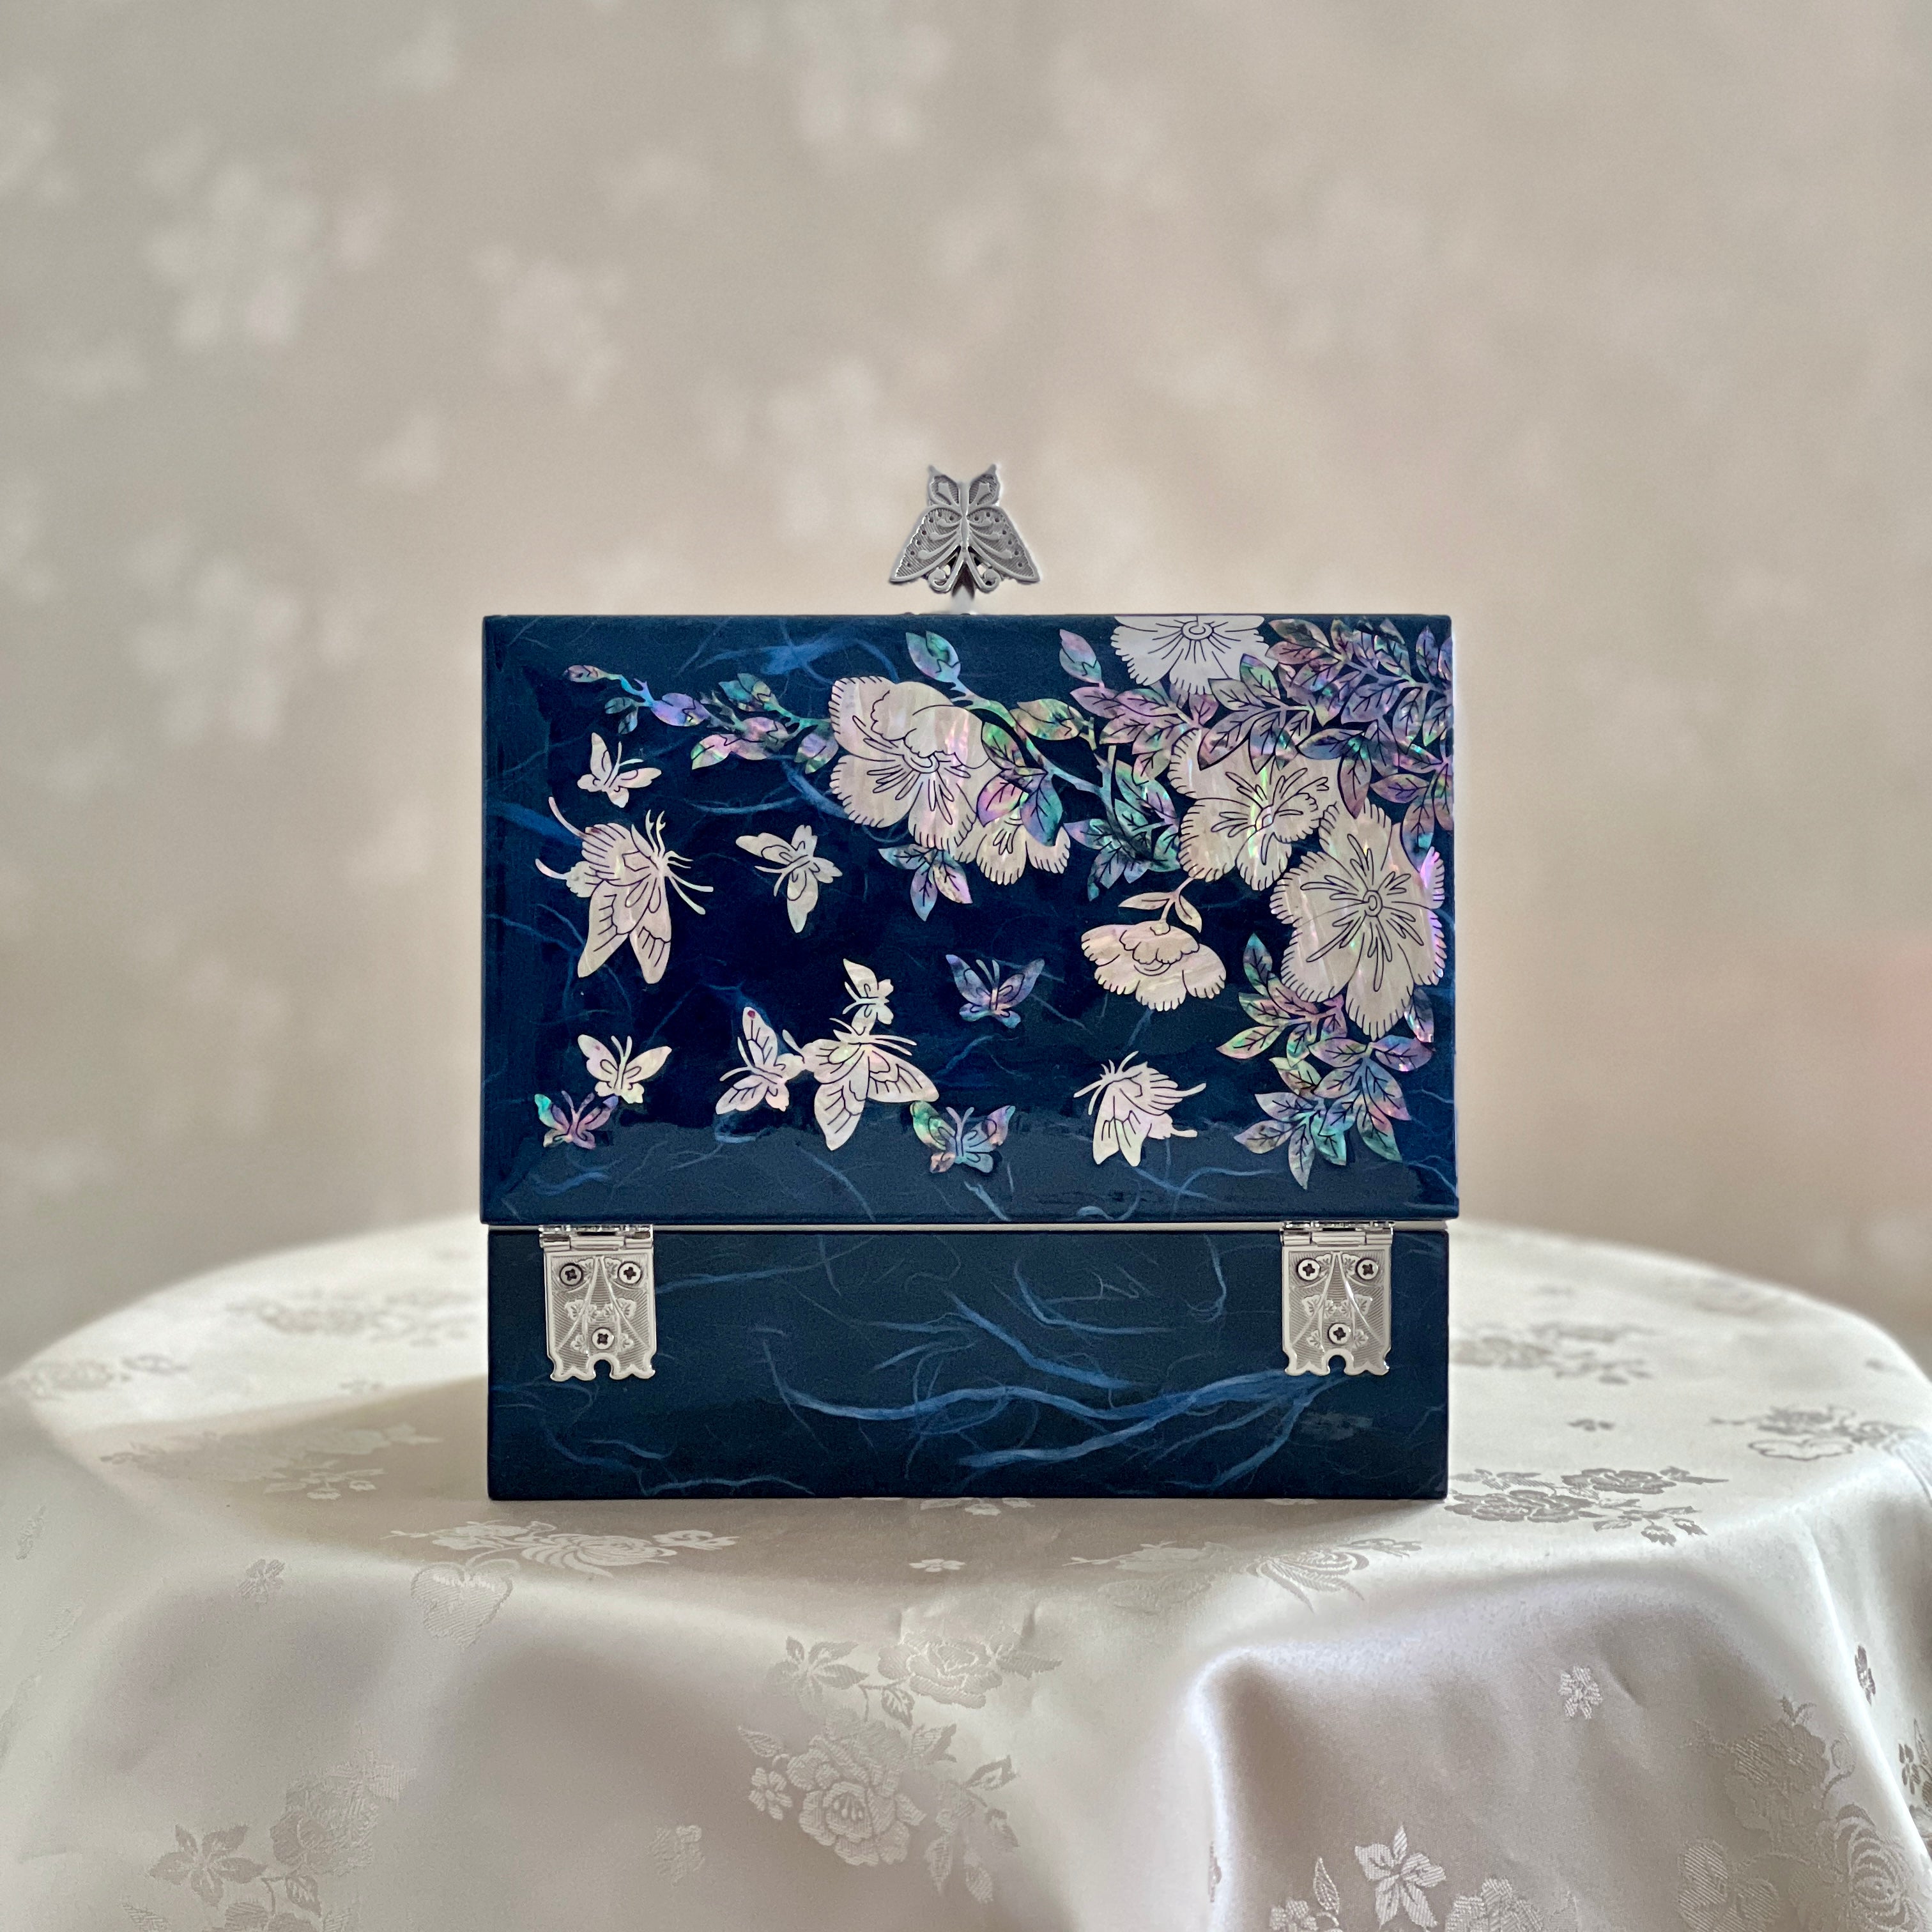 Back view of Handmade Korean mother of pearl jewelry box with crane and pine pattern on navy paper-layered design, perfect for storing valuable jewelry.